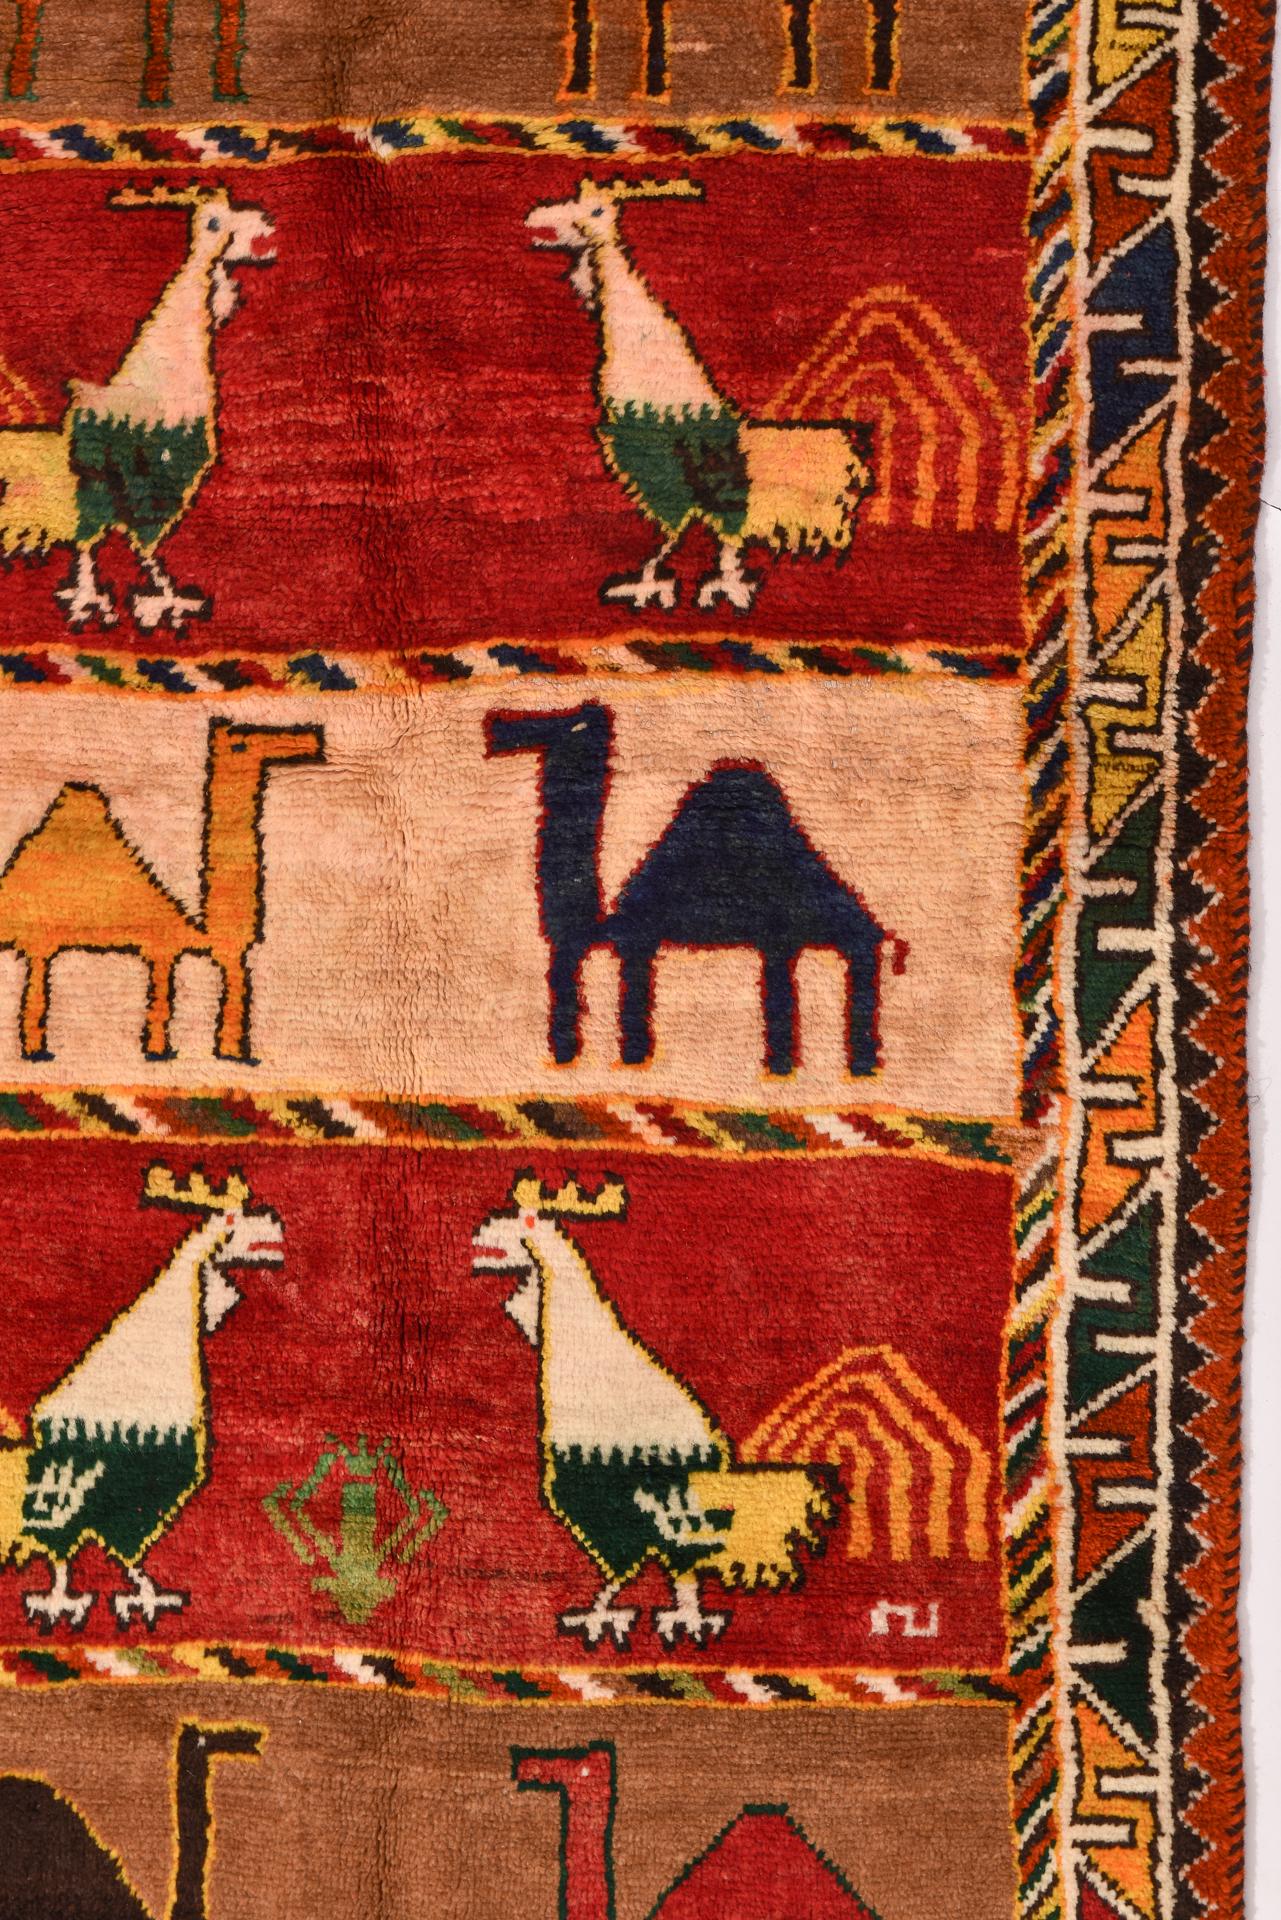 Central Asian Nomadic Rug with Camels and Roosters from My Private Collection For Sale